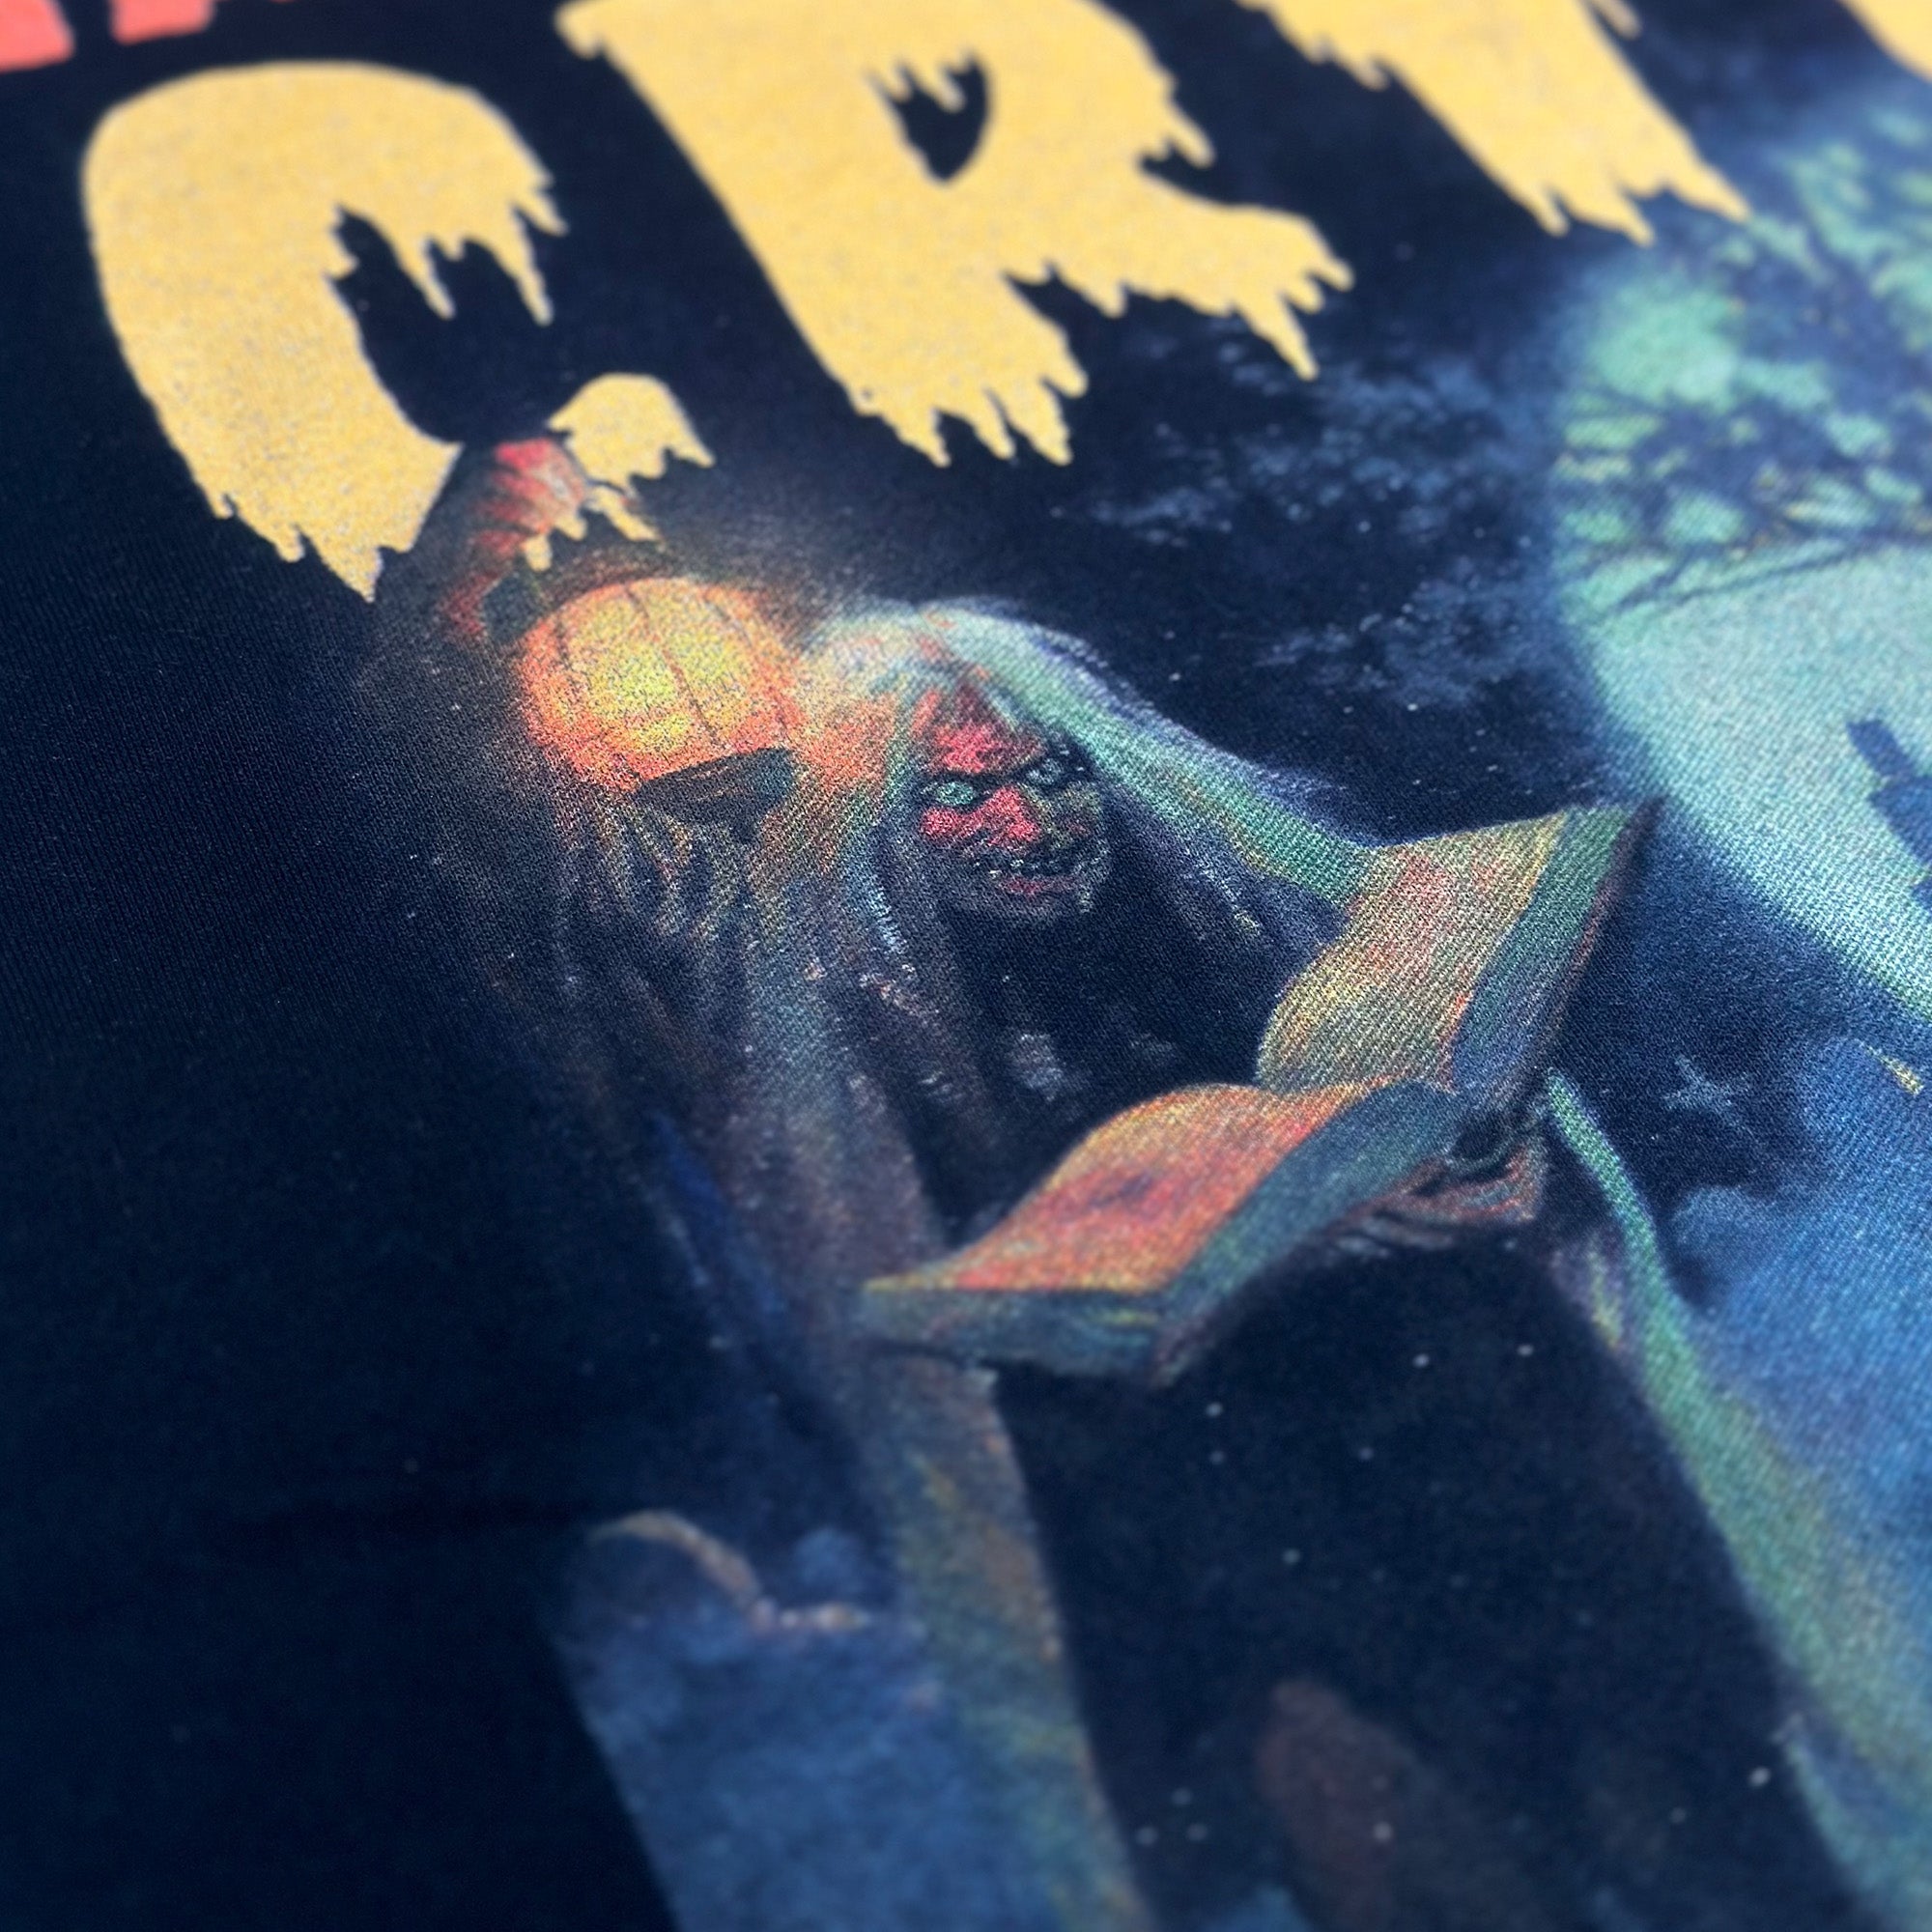 Tales from the Crypt Graphic T-Shirt